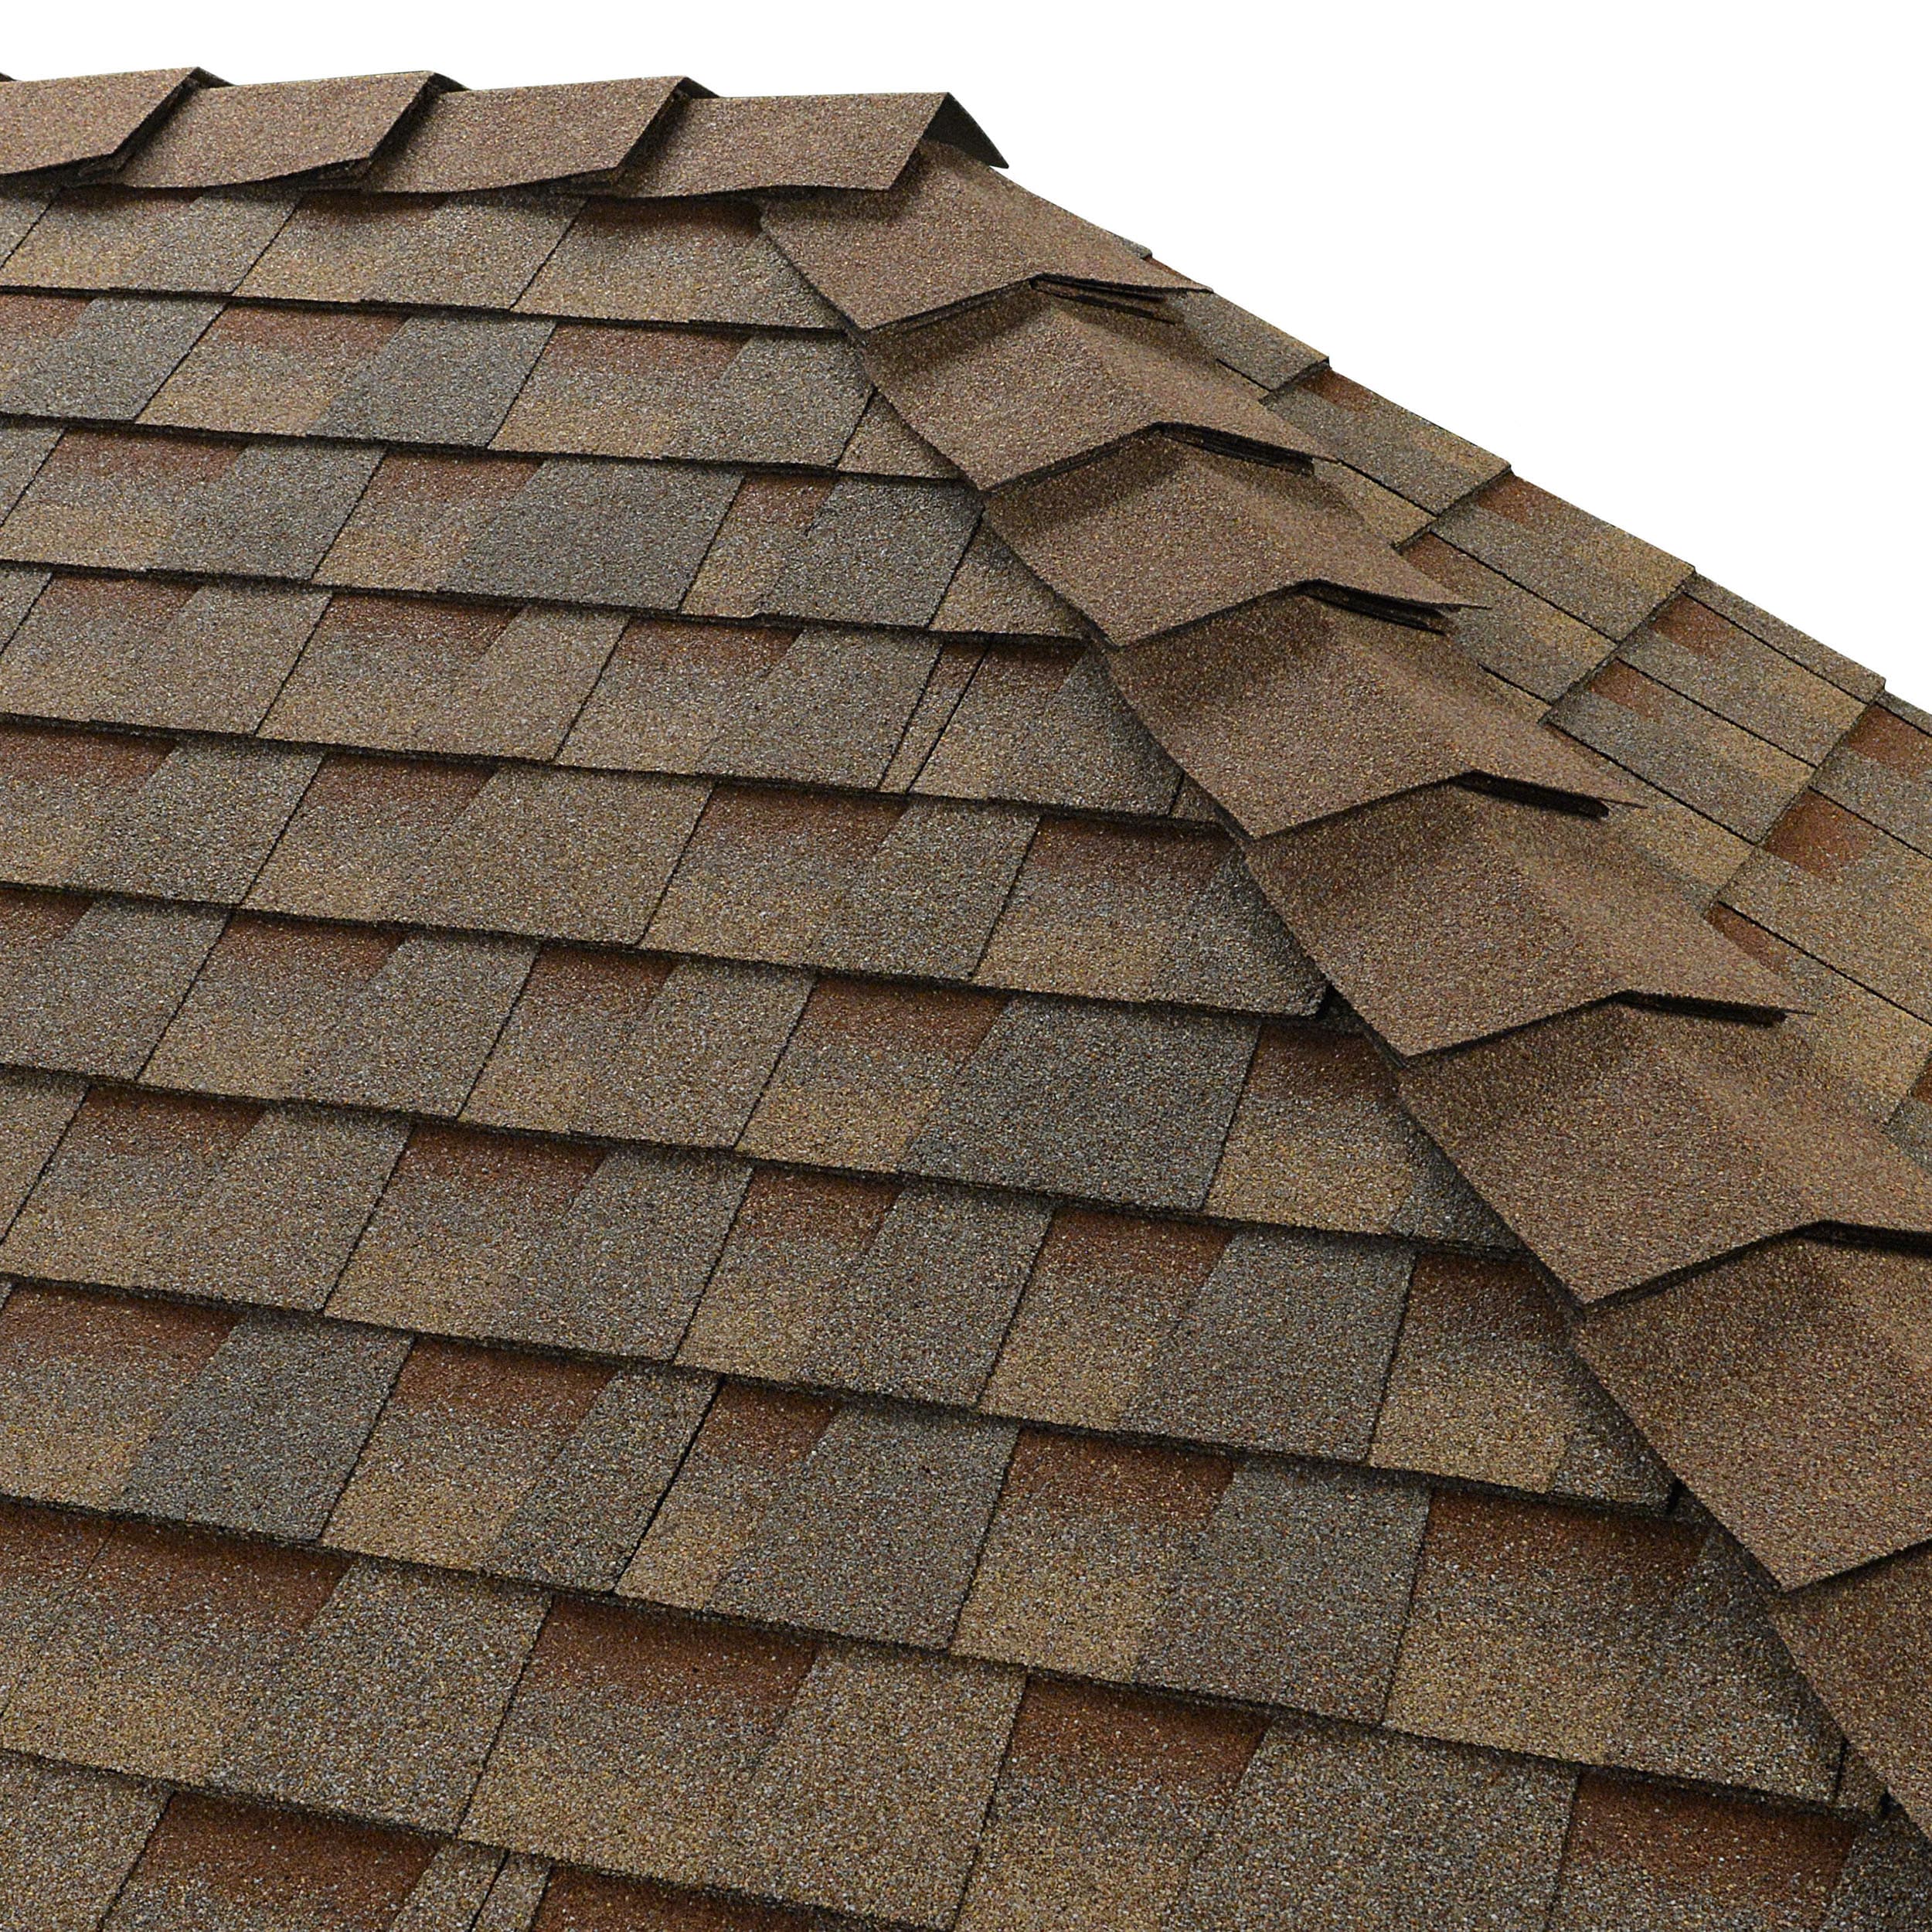 Gaf Timberline Hdz Copper Canyon Laminated Architectural Roof Shingles